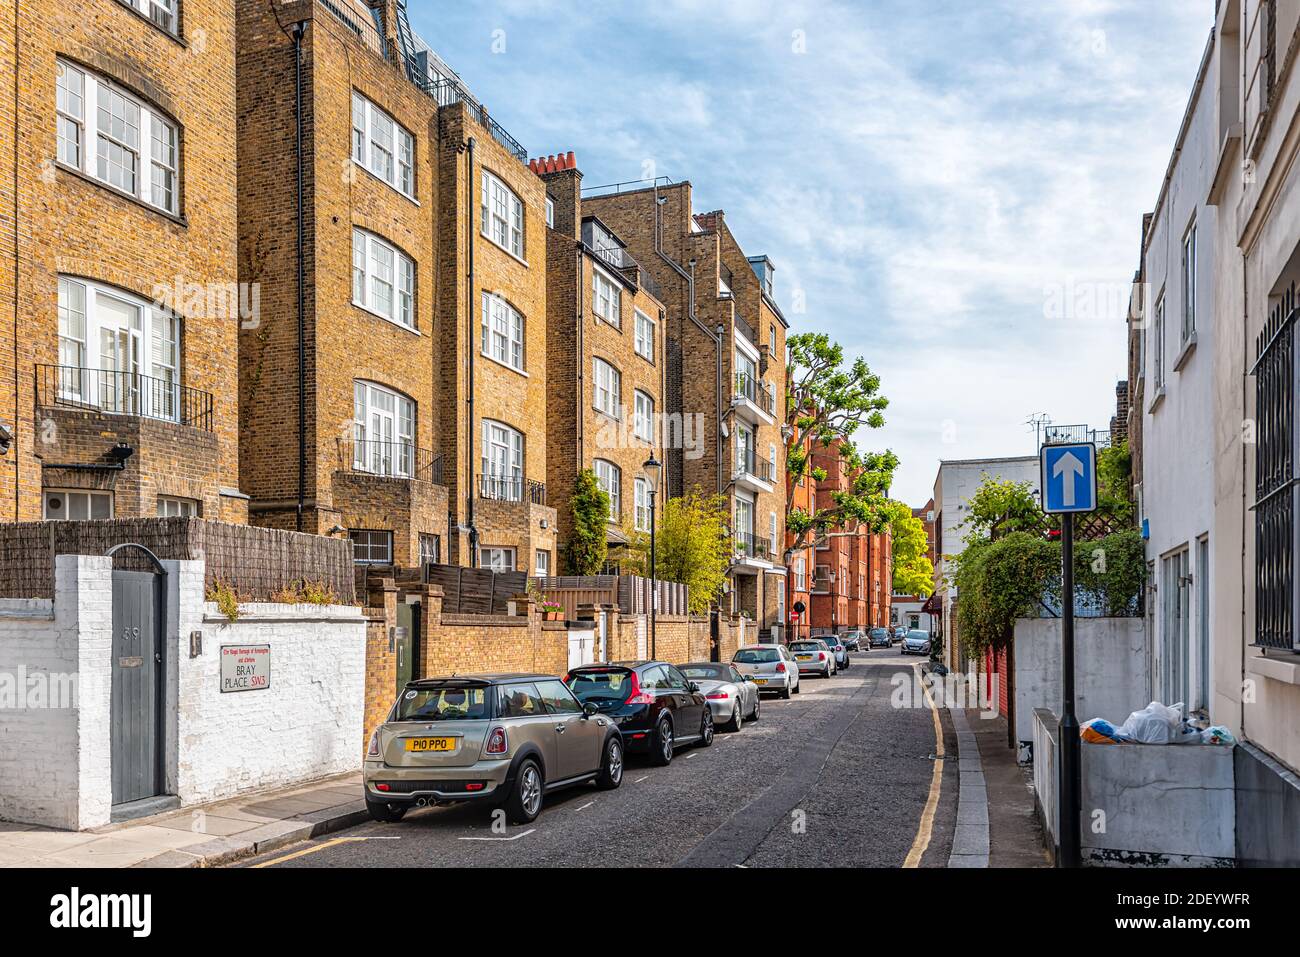 London, UK - June 24, 2018: Bray place street road in West Chelsea and Kensington neighborhood with red yellow brick terraced terrace townhouse, cars Stock Photo